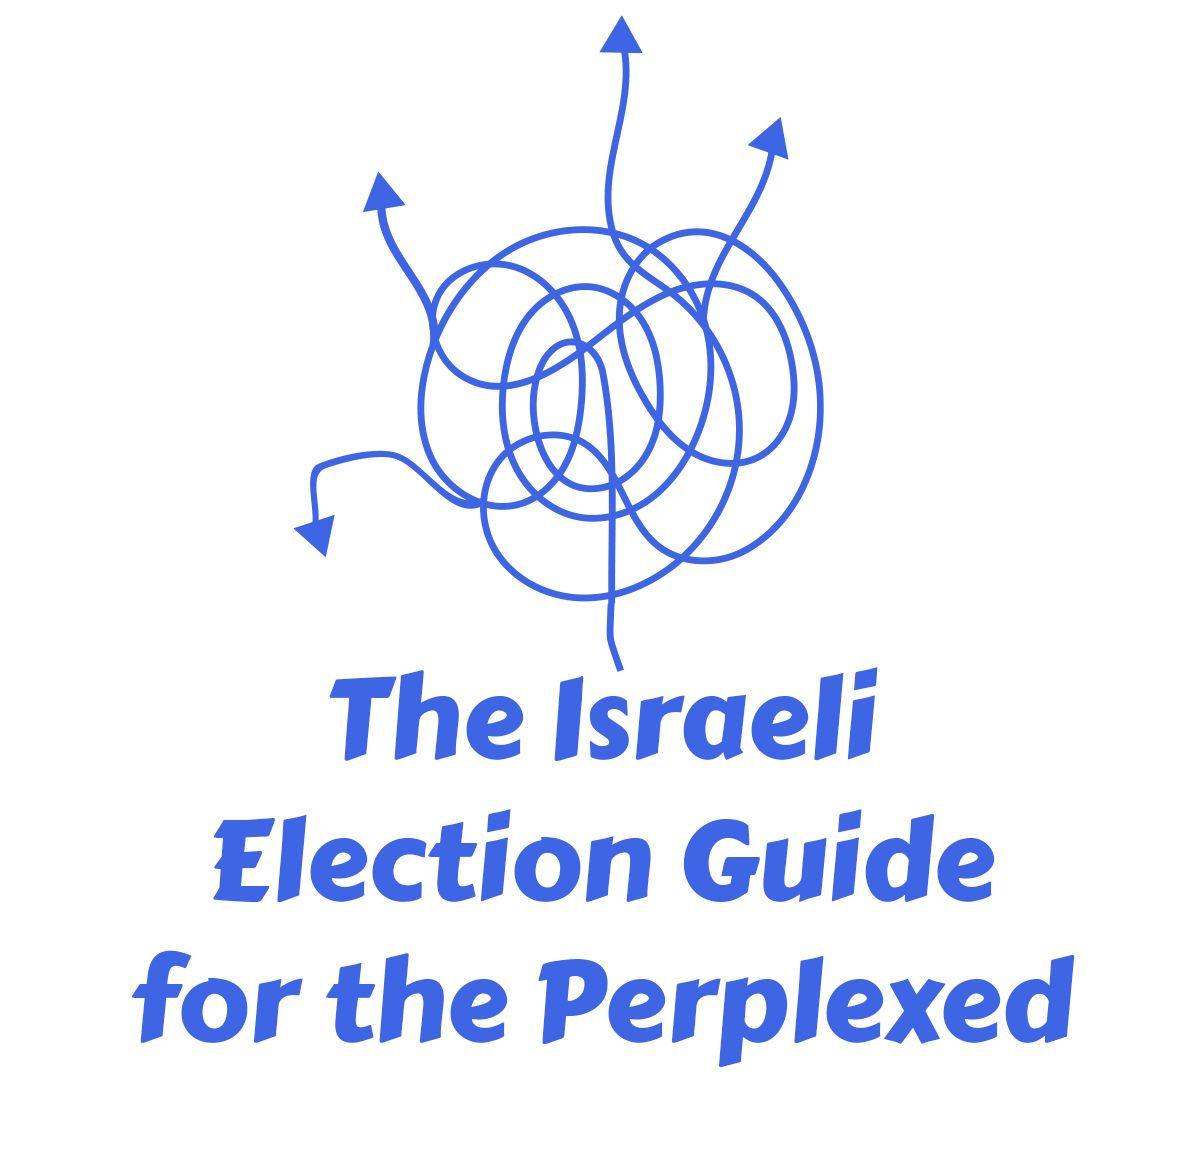 The Israeli Election Guide for the Perplexed, Part 2